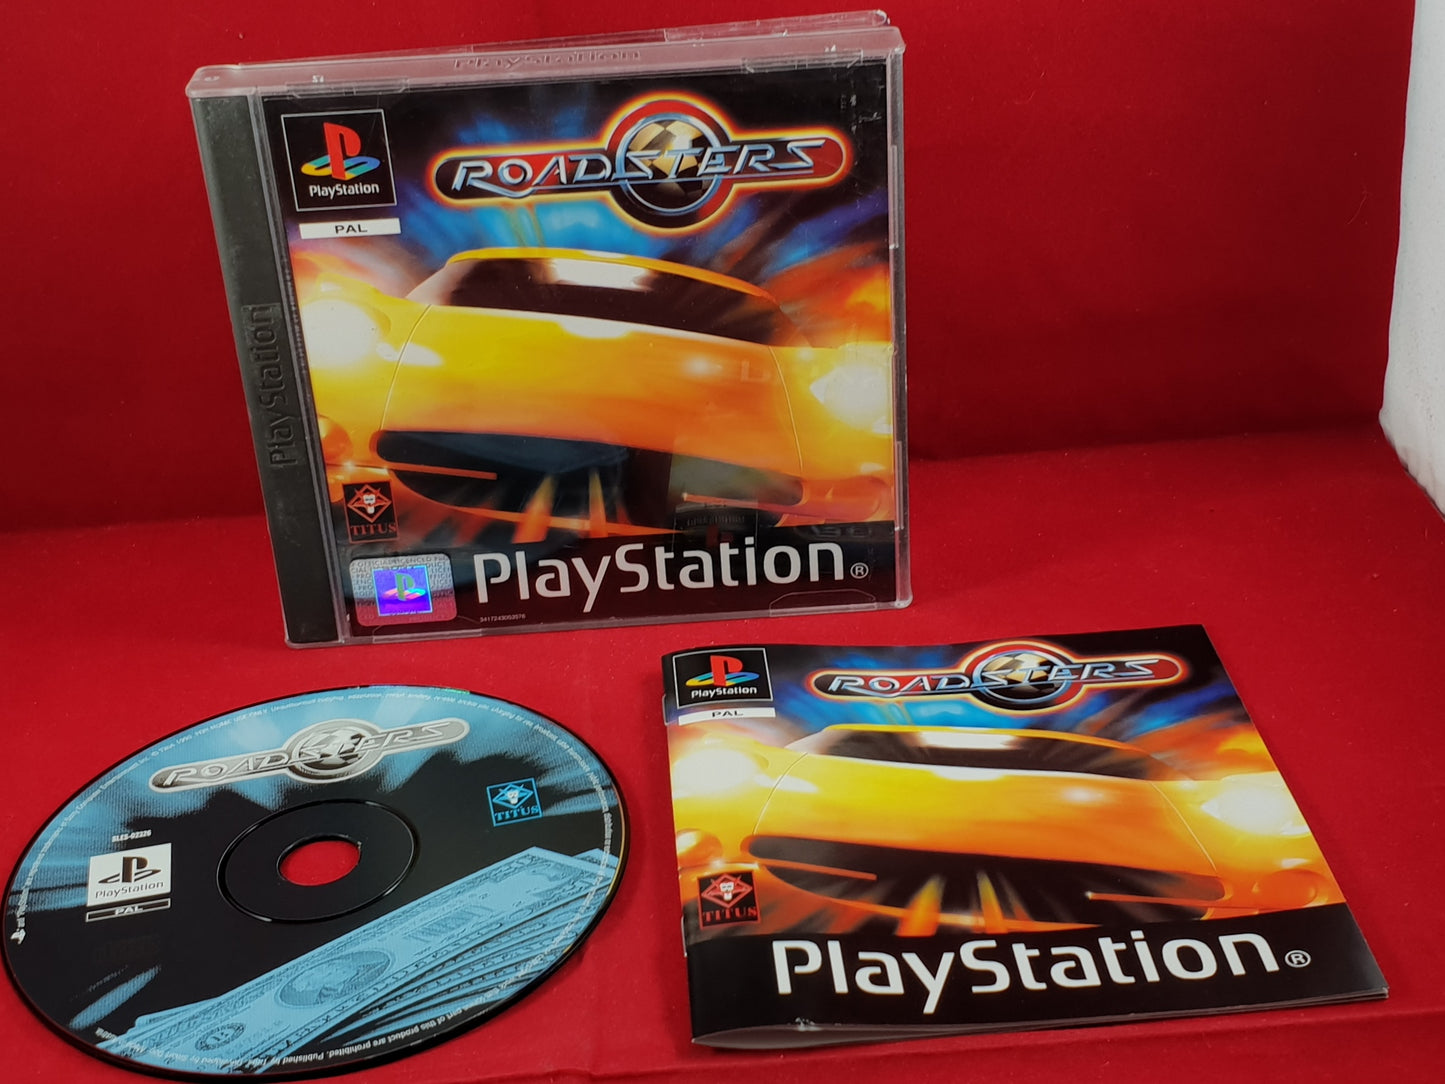 Roadsters Sony Playstation 1 (PS1) Game